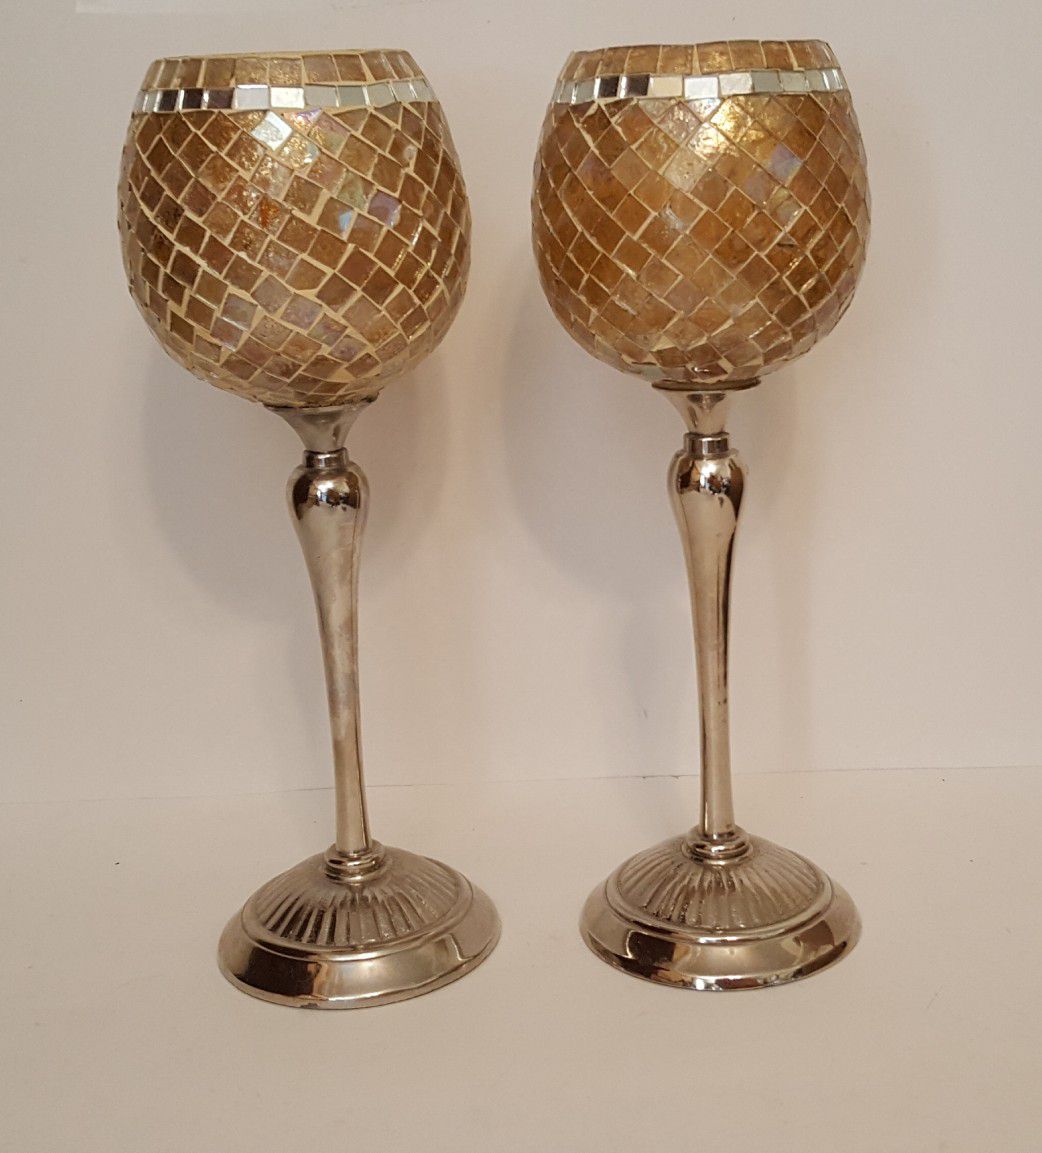 2 Gold, Silver and mirror tile votive candle holders